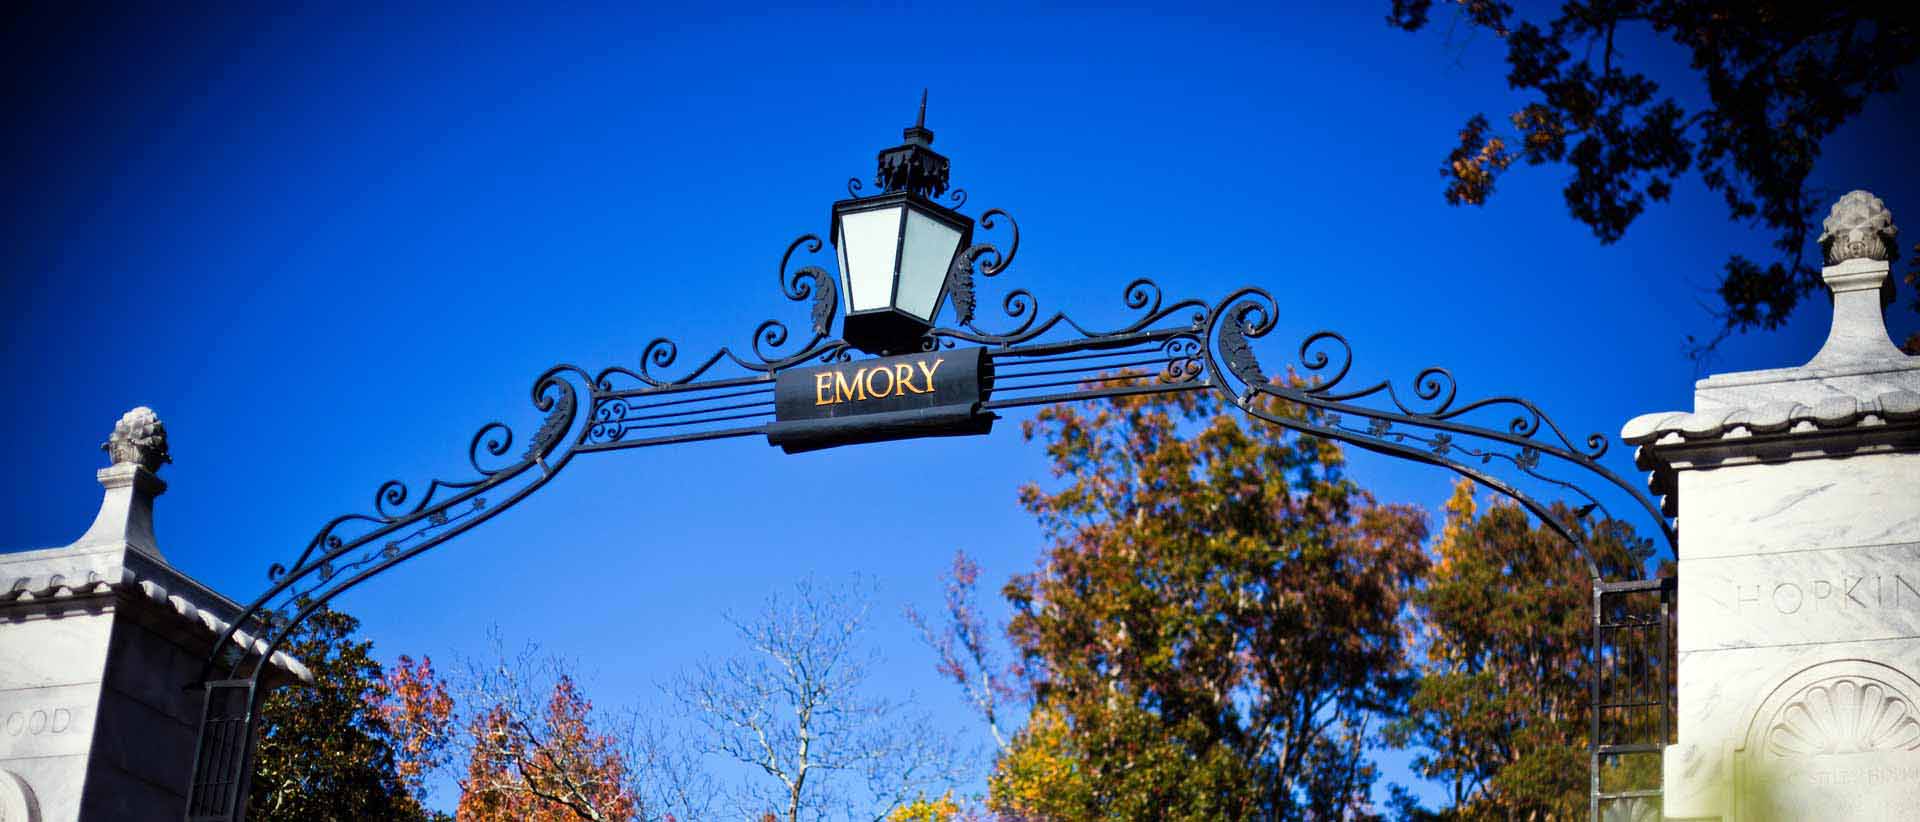 emory gate with blue sky behind it